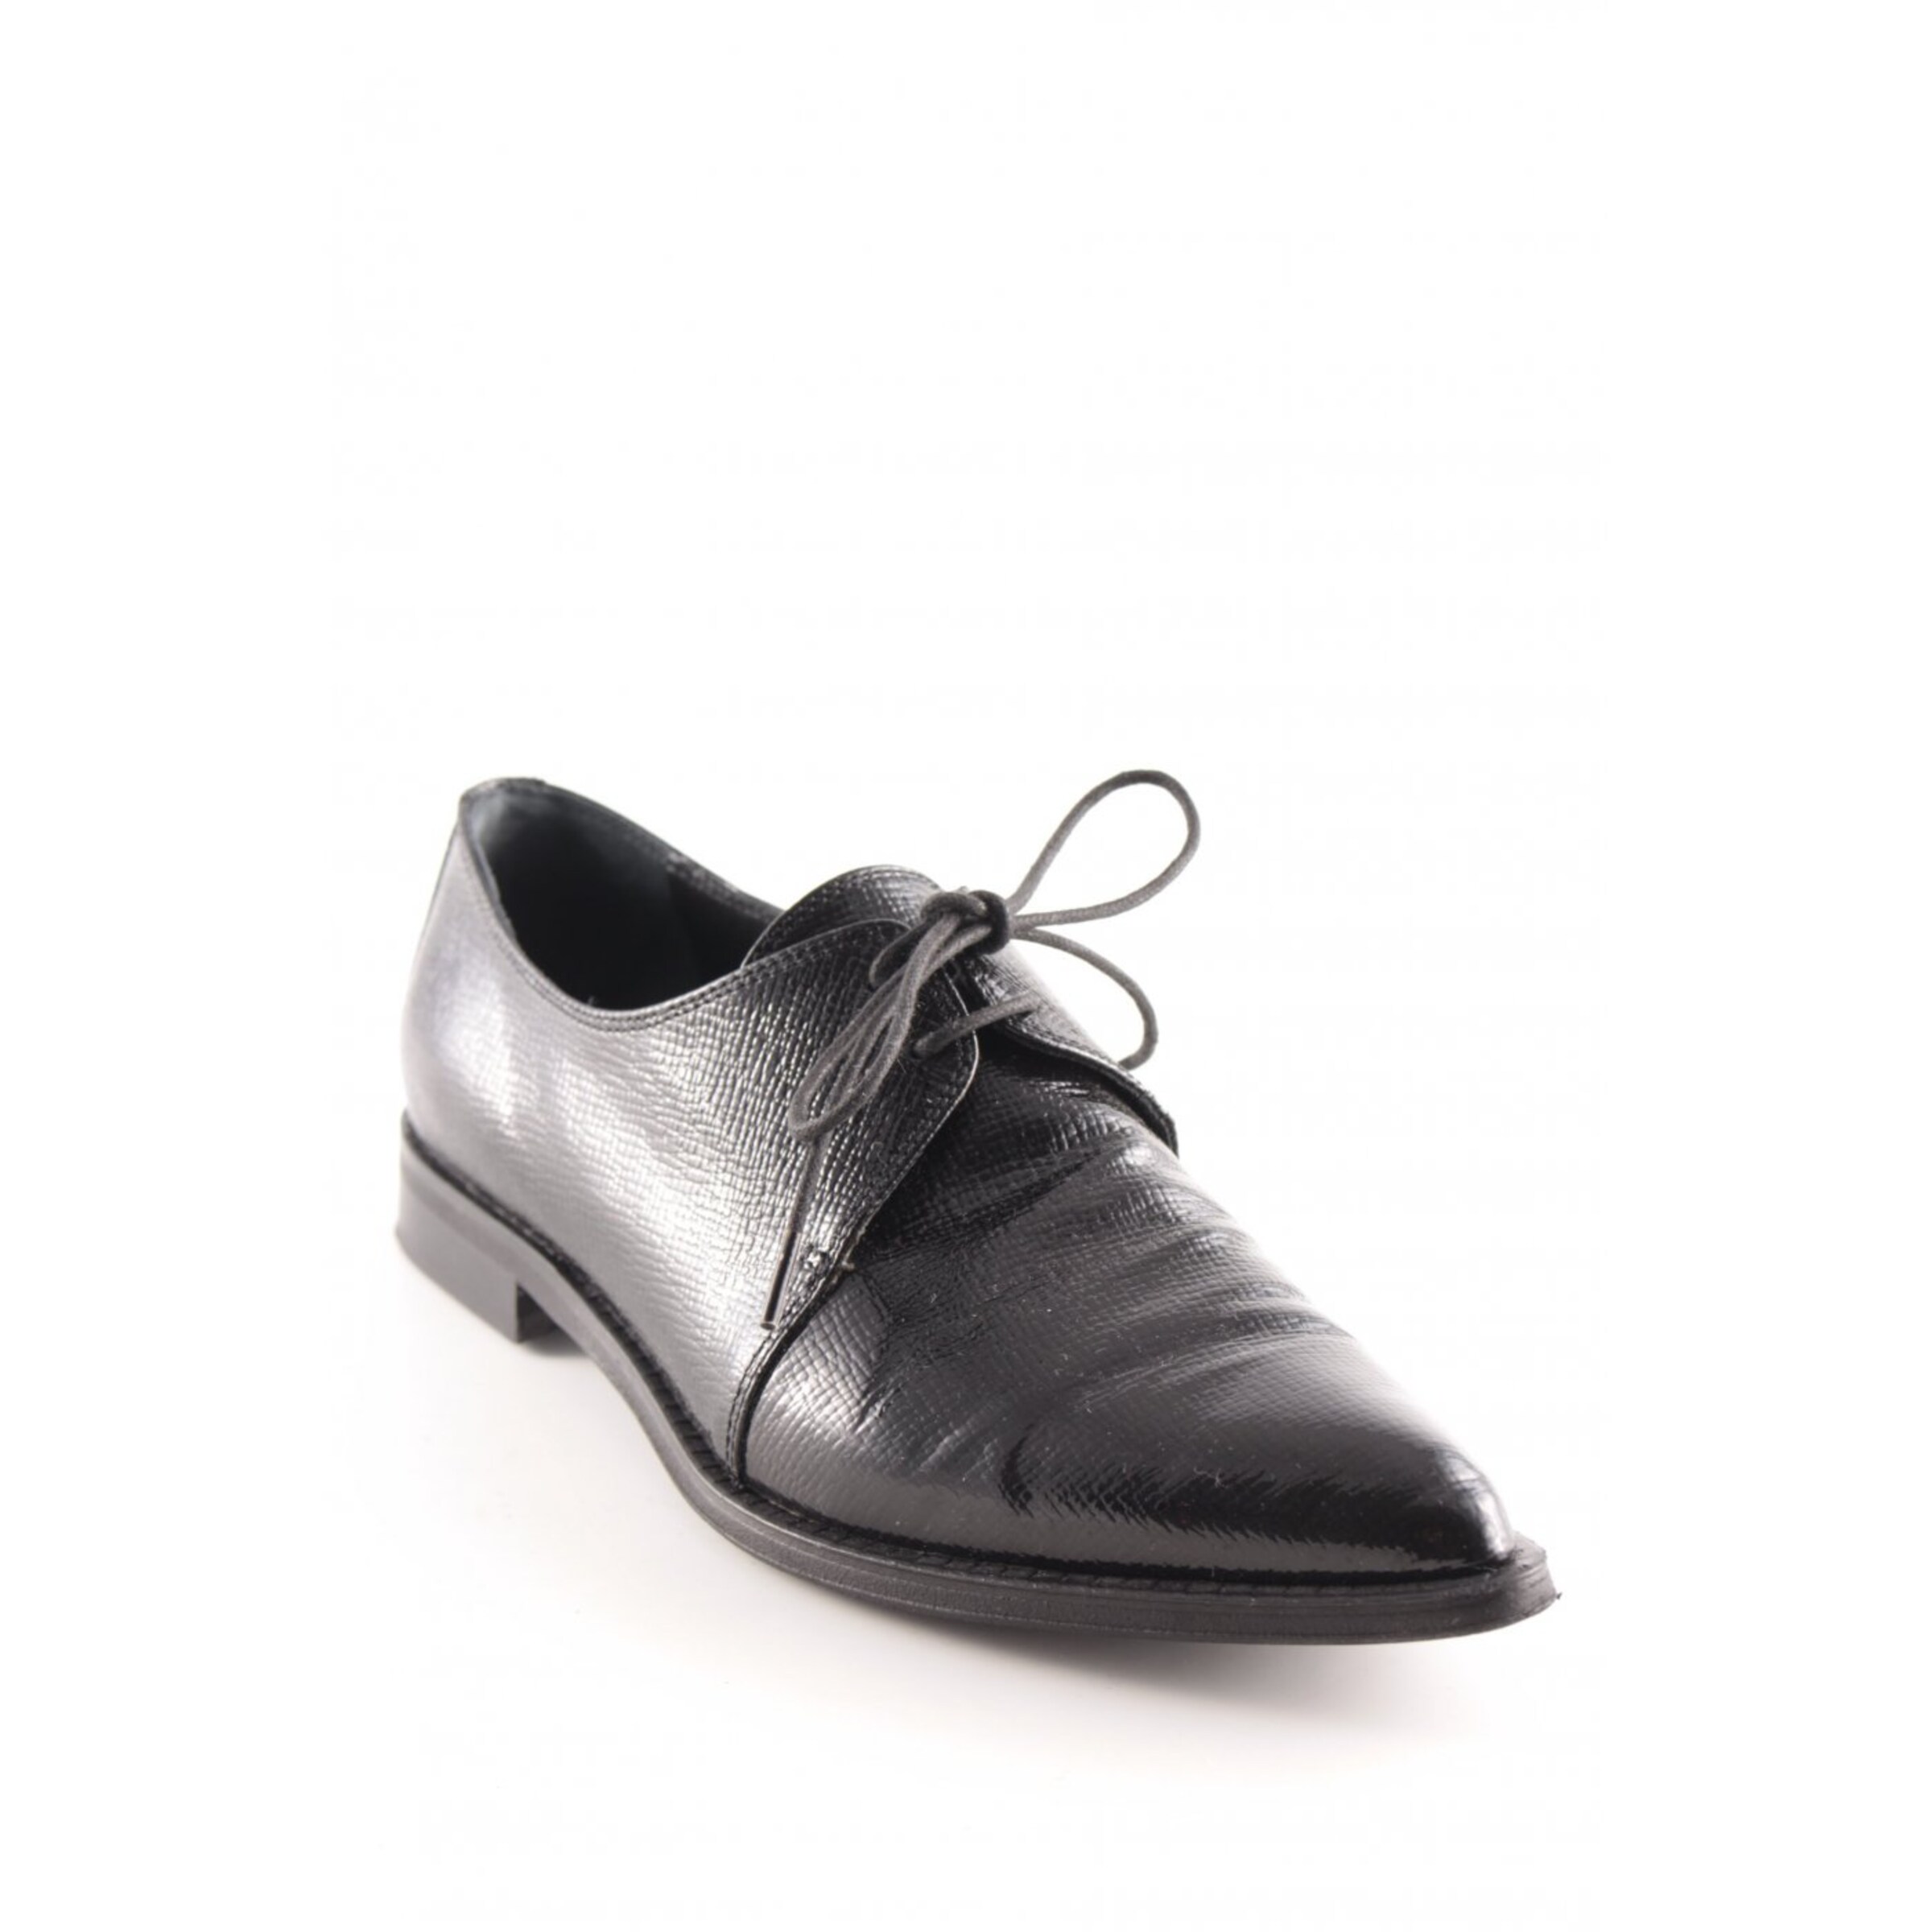 Shoes Business Shoes Oxfords Andrea Puccini Oxfords black business style 